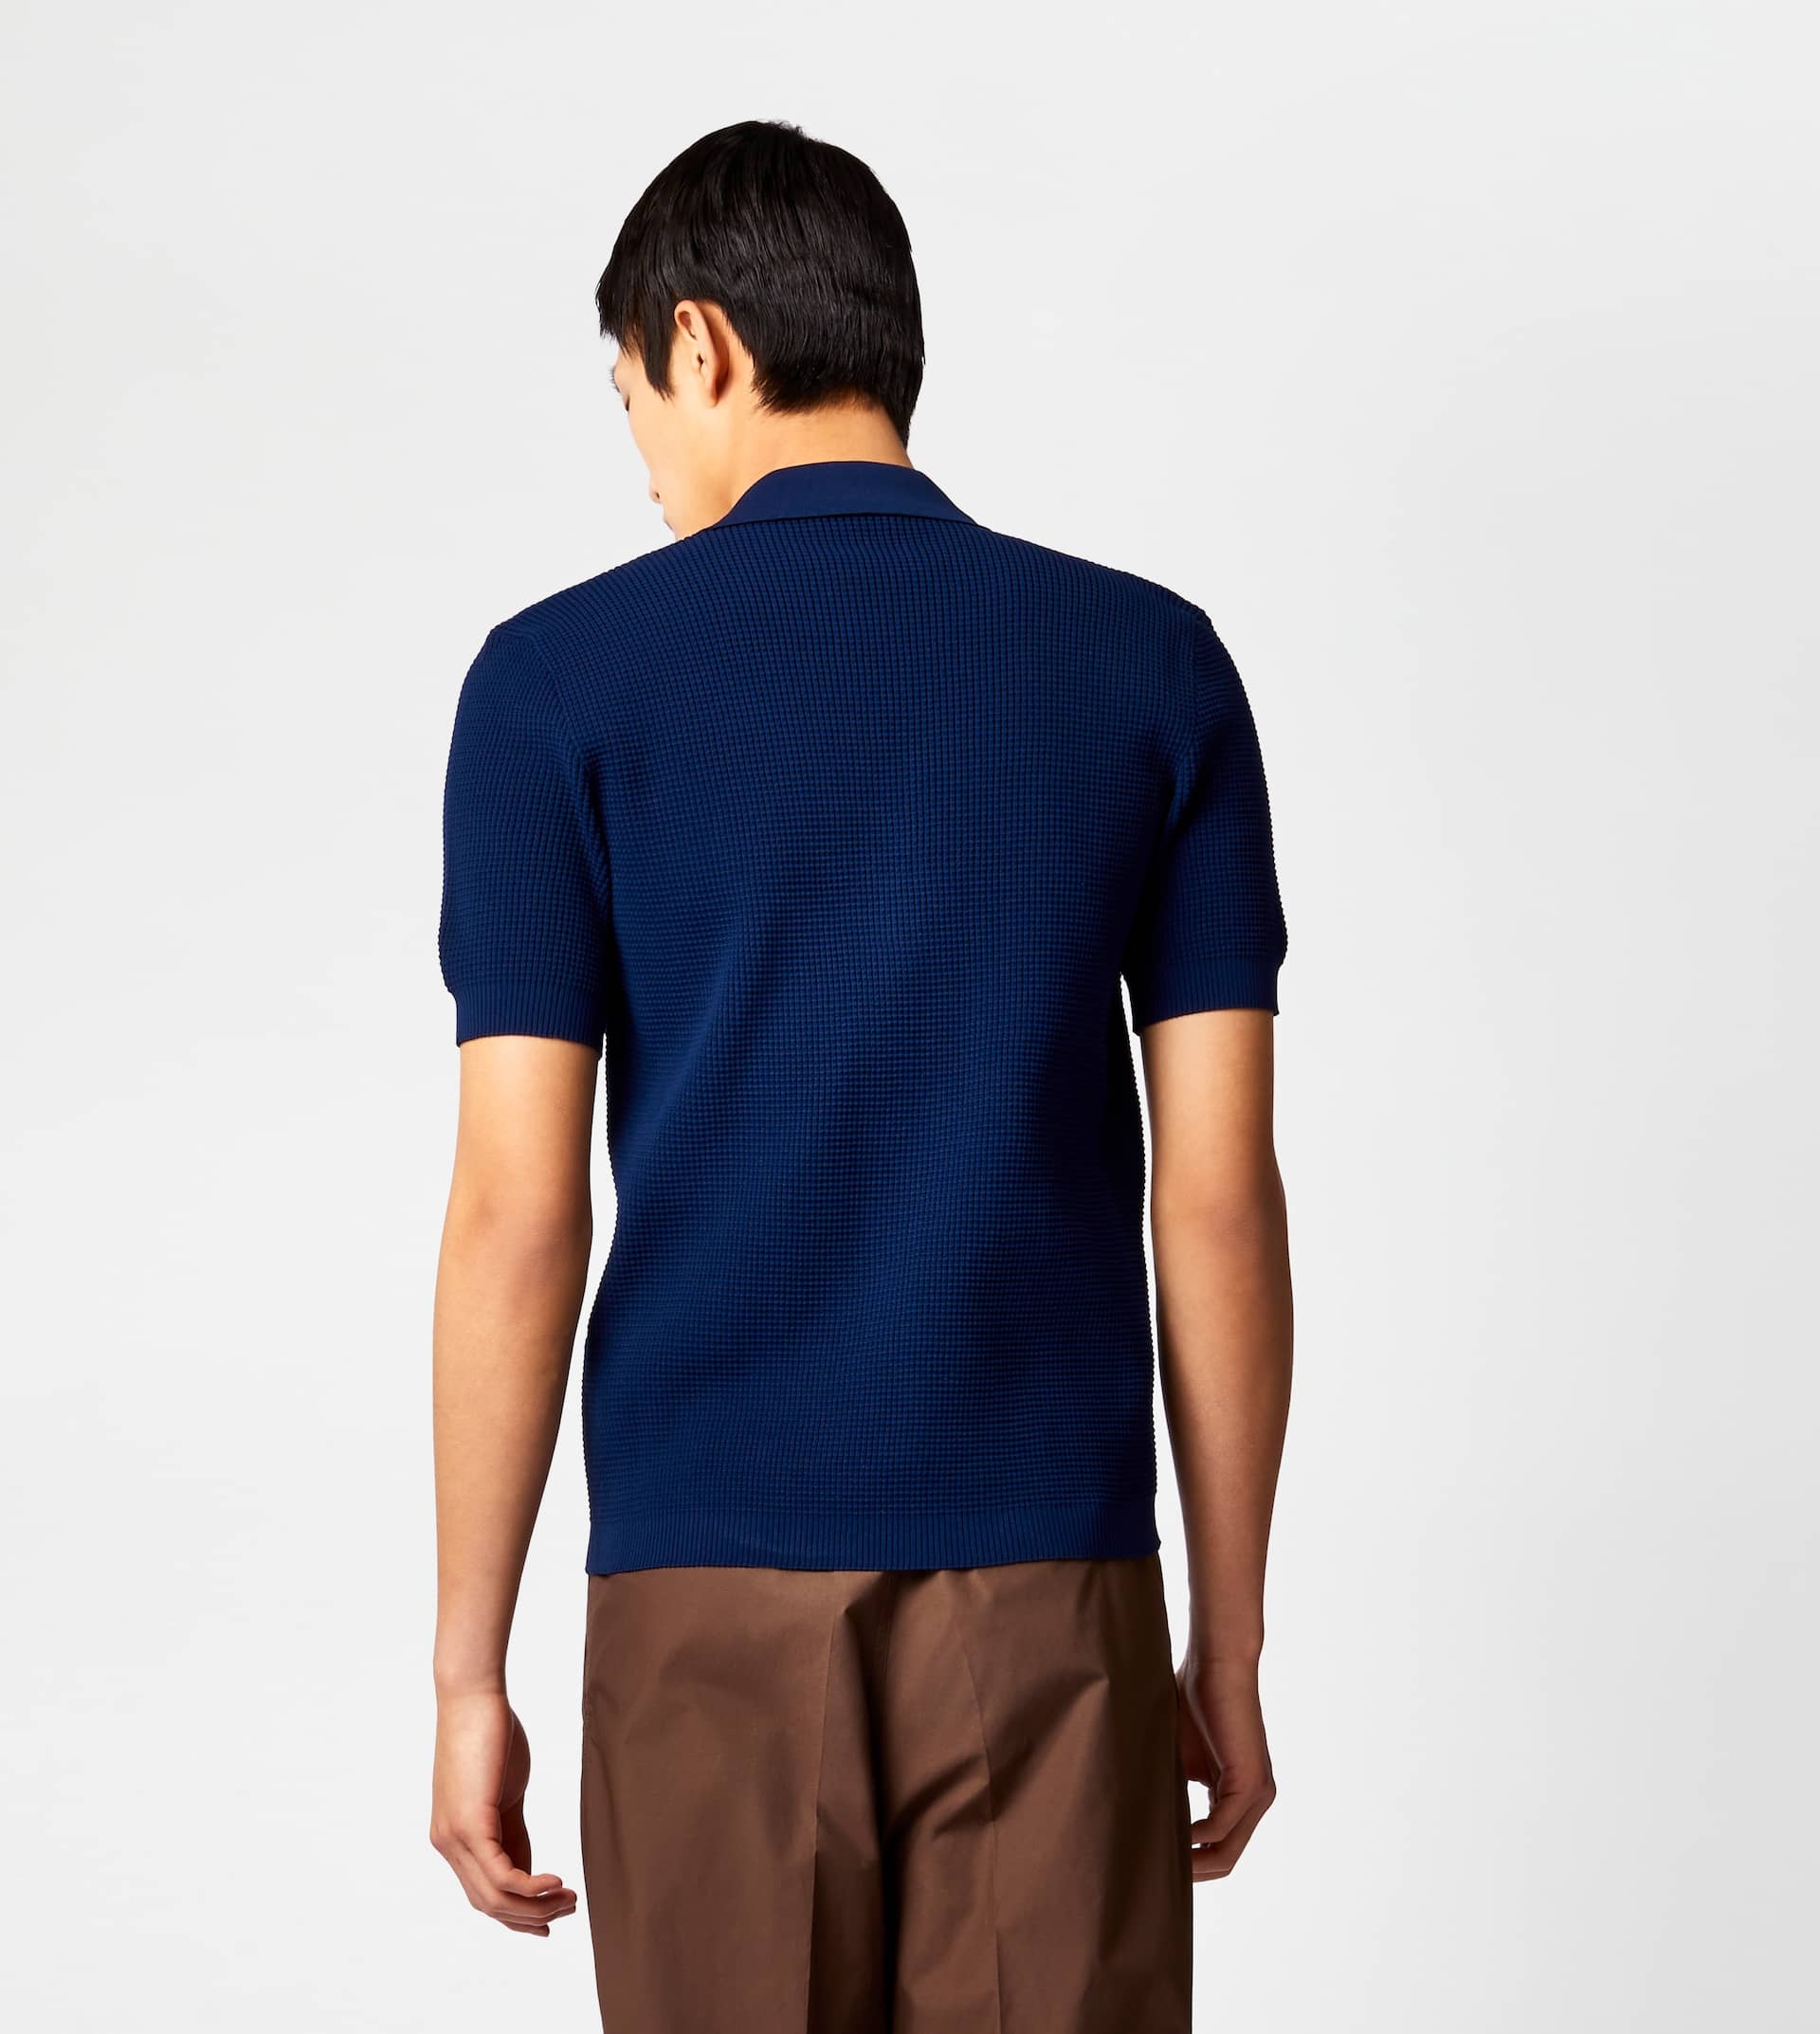 POLO SHIRT IN KNIT - BLUE - 5